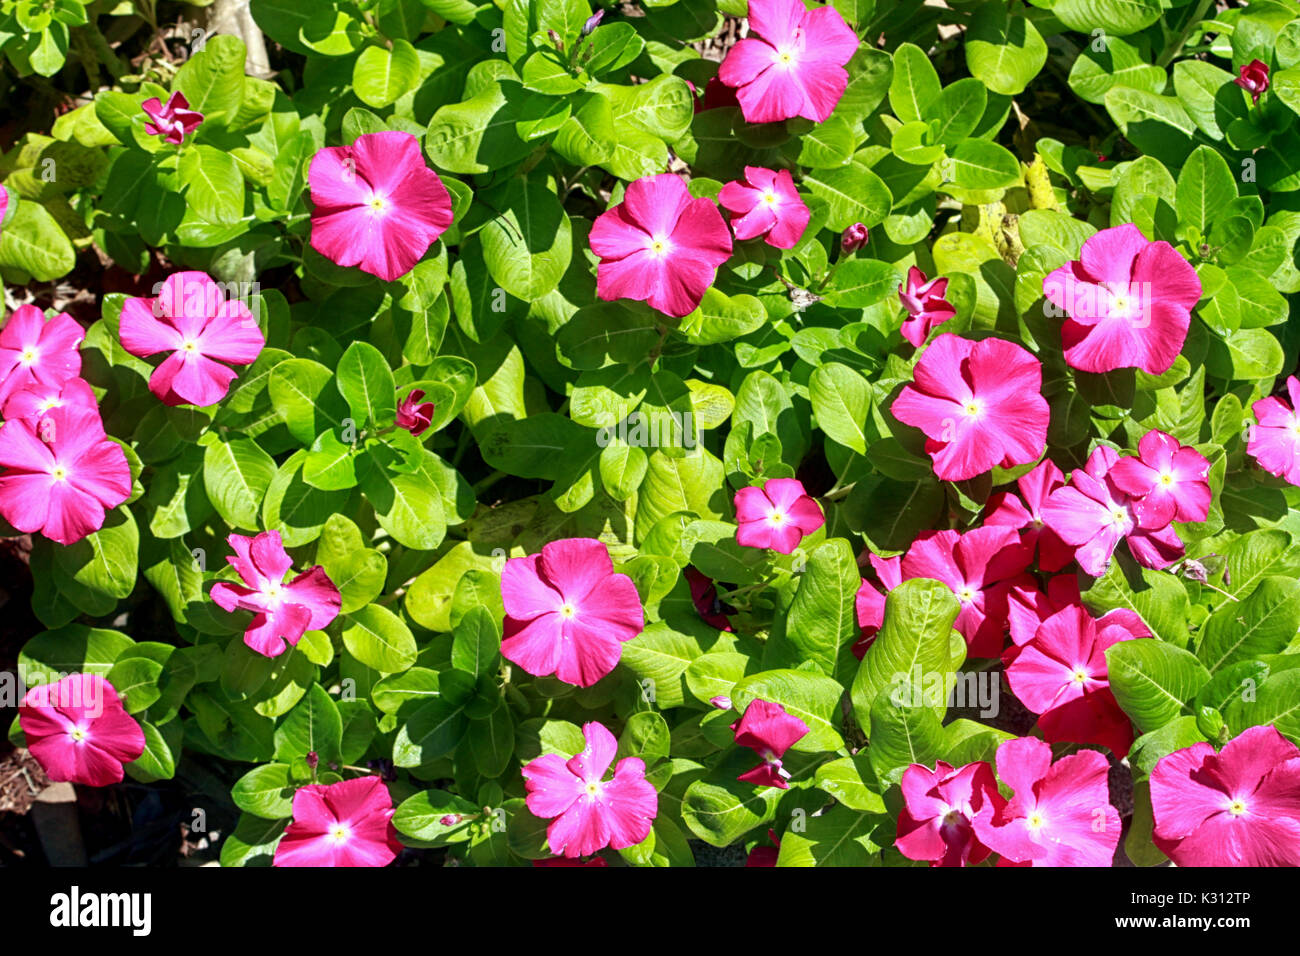 Pink blossoms of a Madagascar periwinkle plant stand out against the bright green leaves. Stock Photo